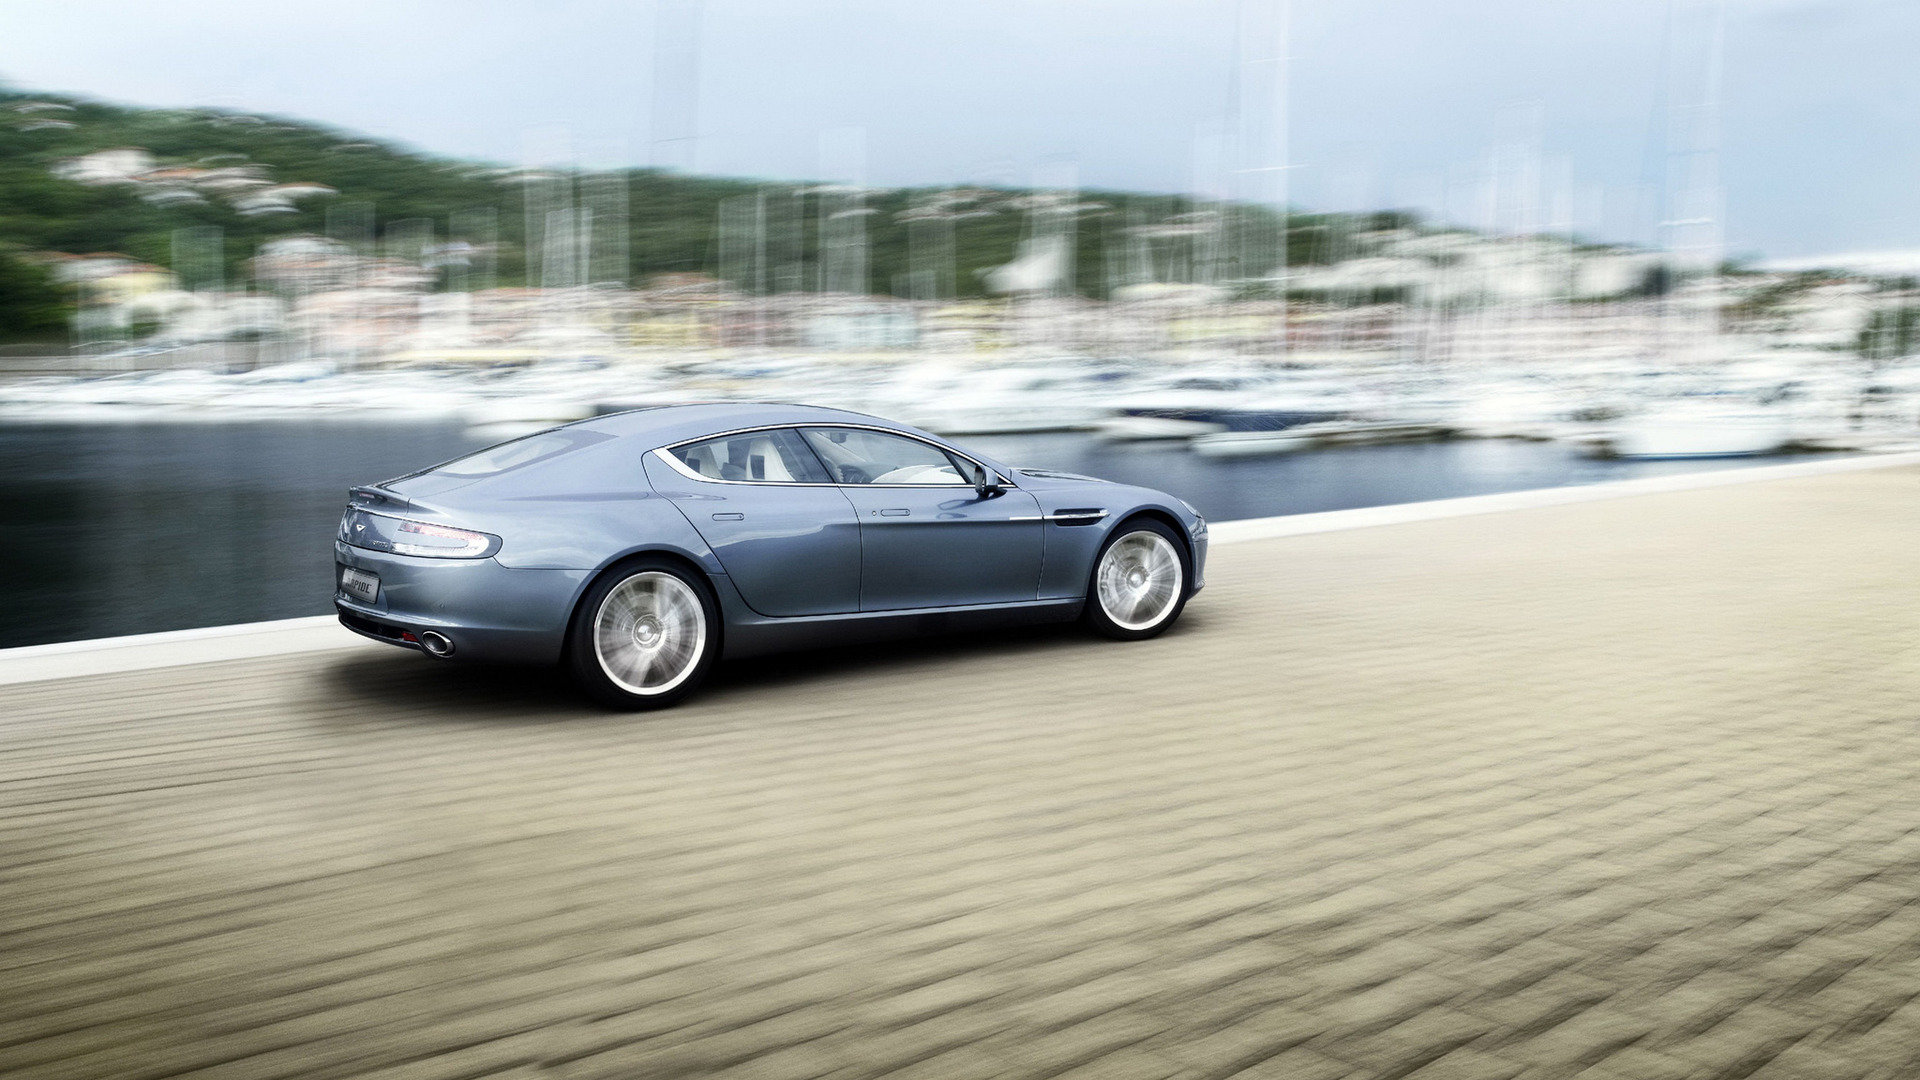 Download 1080p Aston Martin Rapide PC background ID:423534 for free